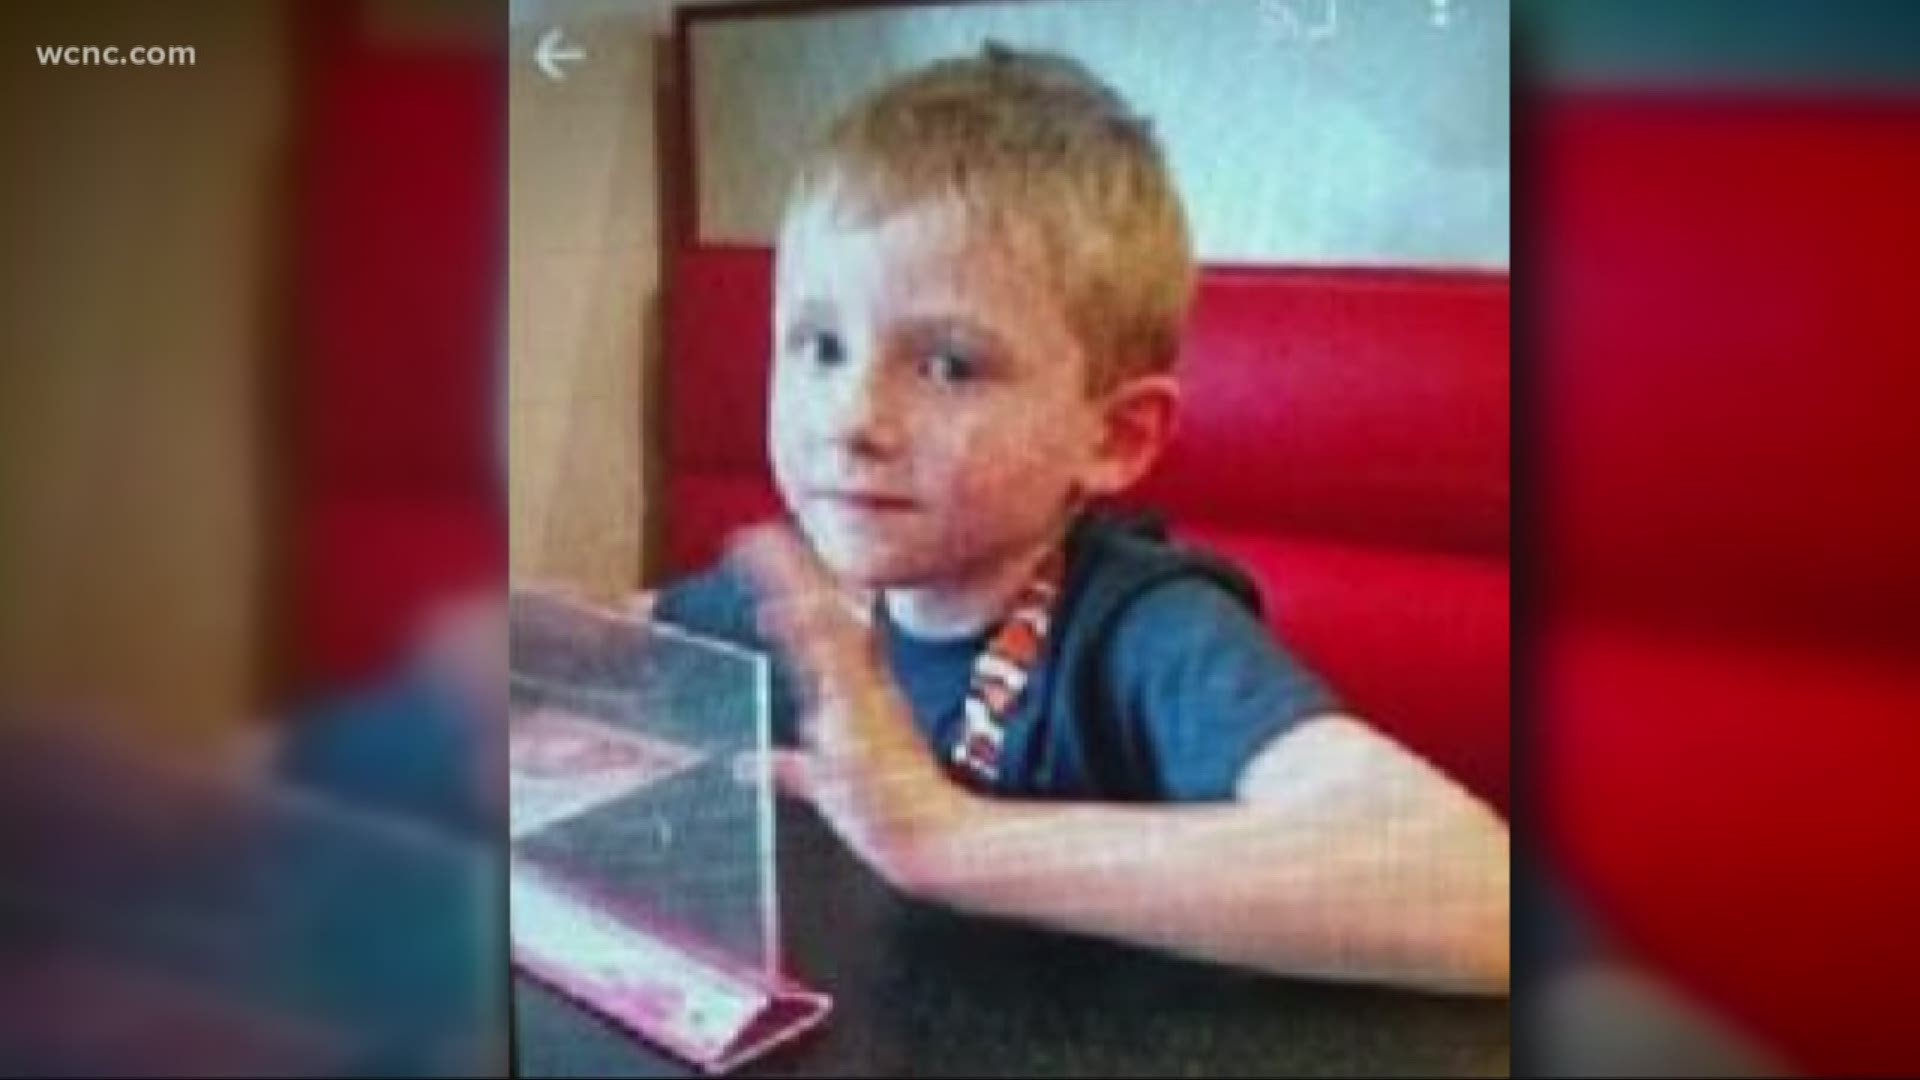 The autopsy for 6-year-old Maddox Ritch was released Thursday, revealing the young boy's cause of death as "probable drowning."